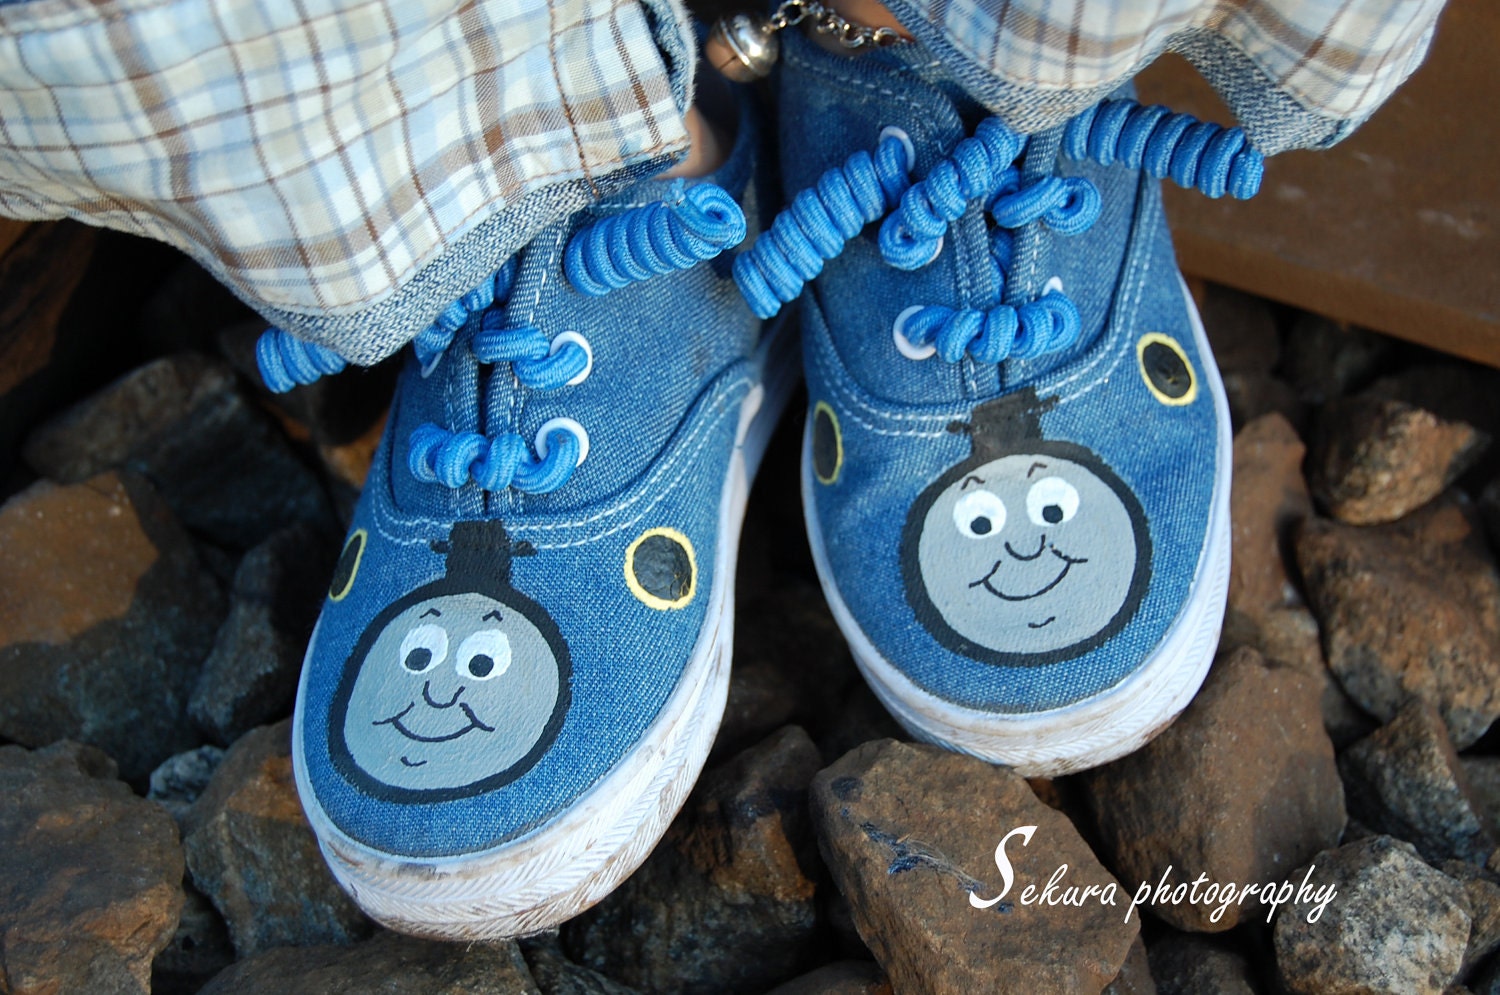 Boy shoes - Hand painted Train shoes - engine painted on denim for boys - infant and toddler